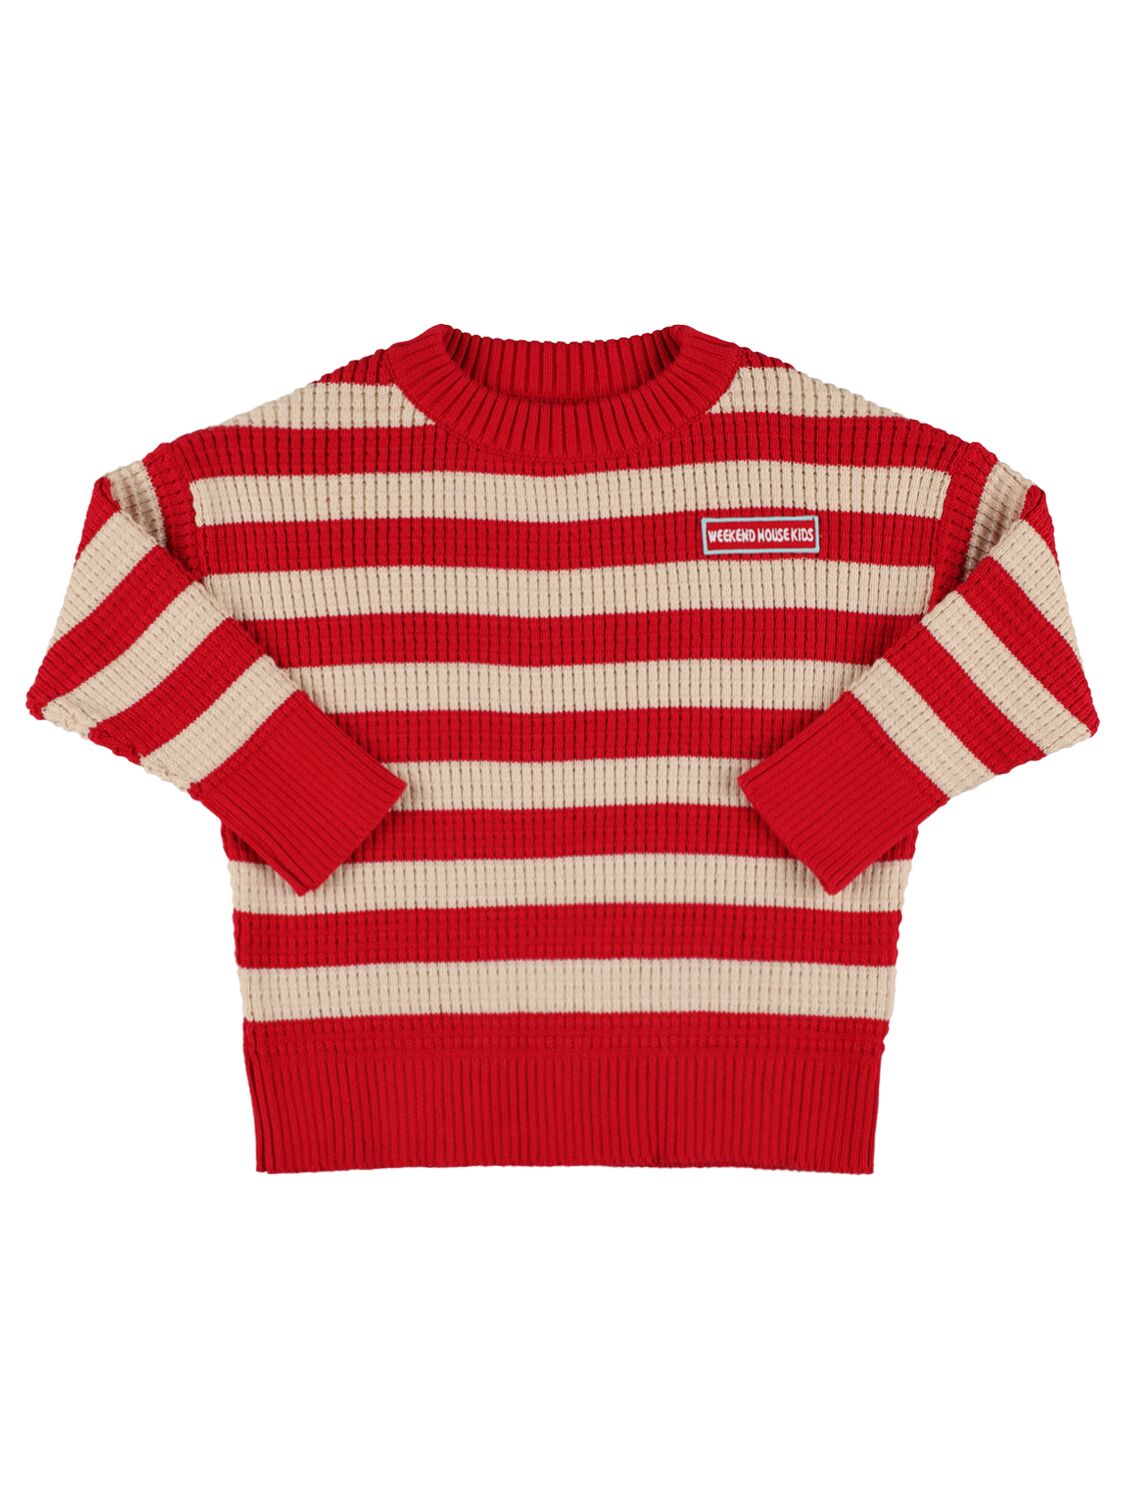 Image of Striped Cotton Knit Sweater